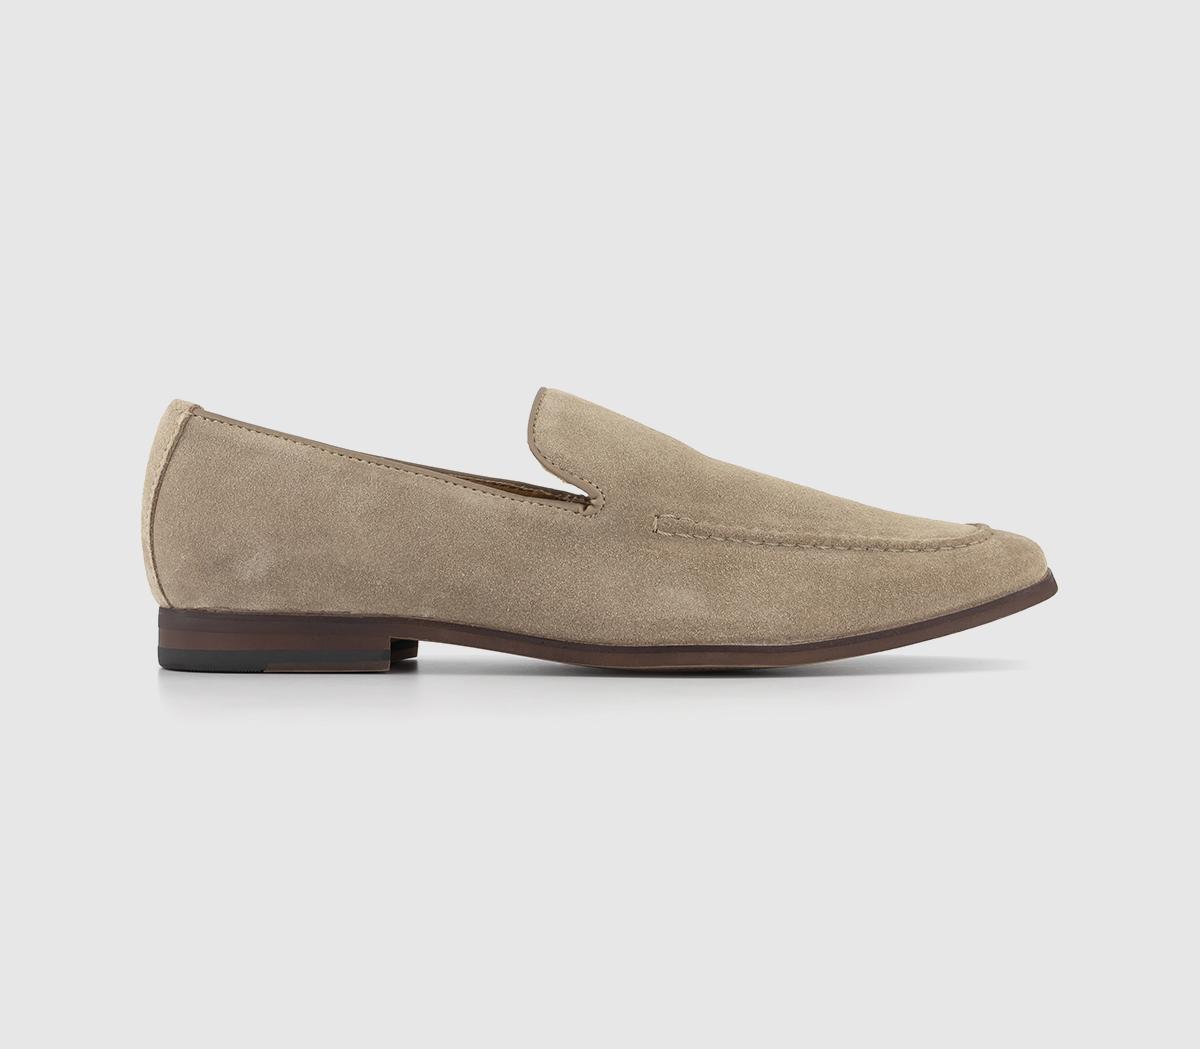 OFFICE Cody Slip On Loafers Beige Suede - Men's Casual Shoes